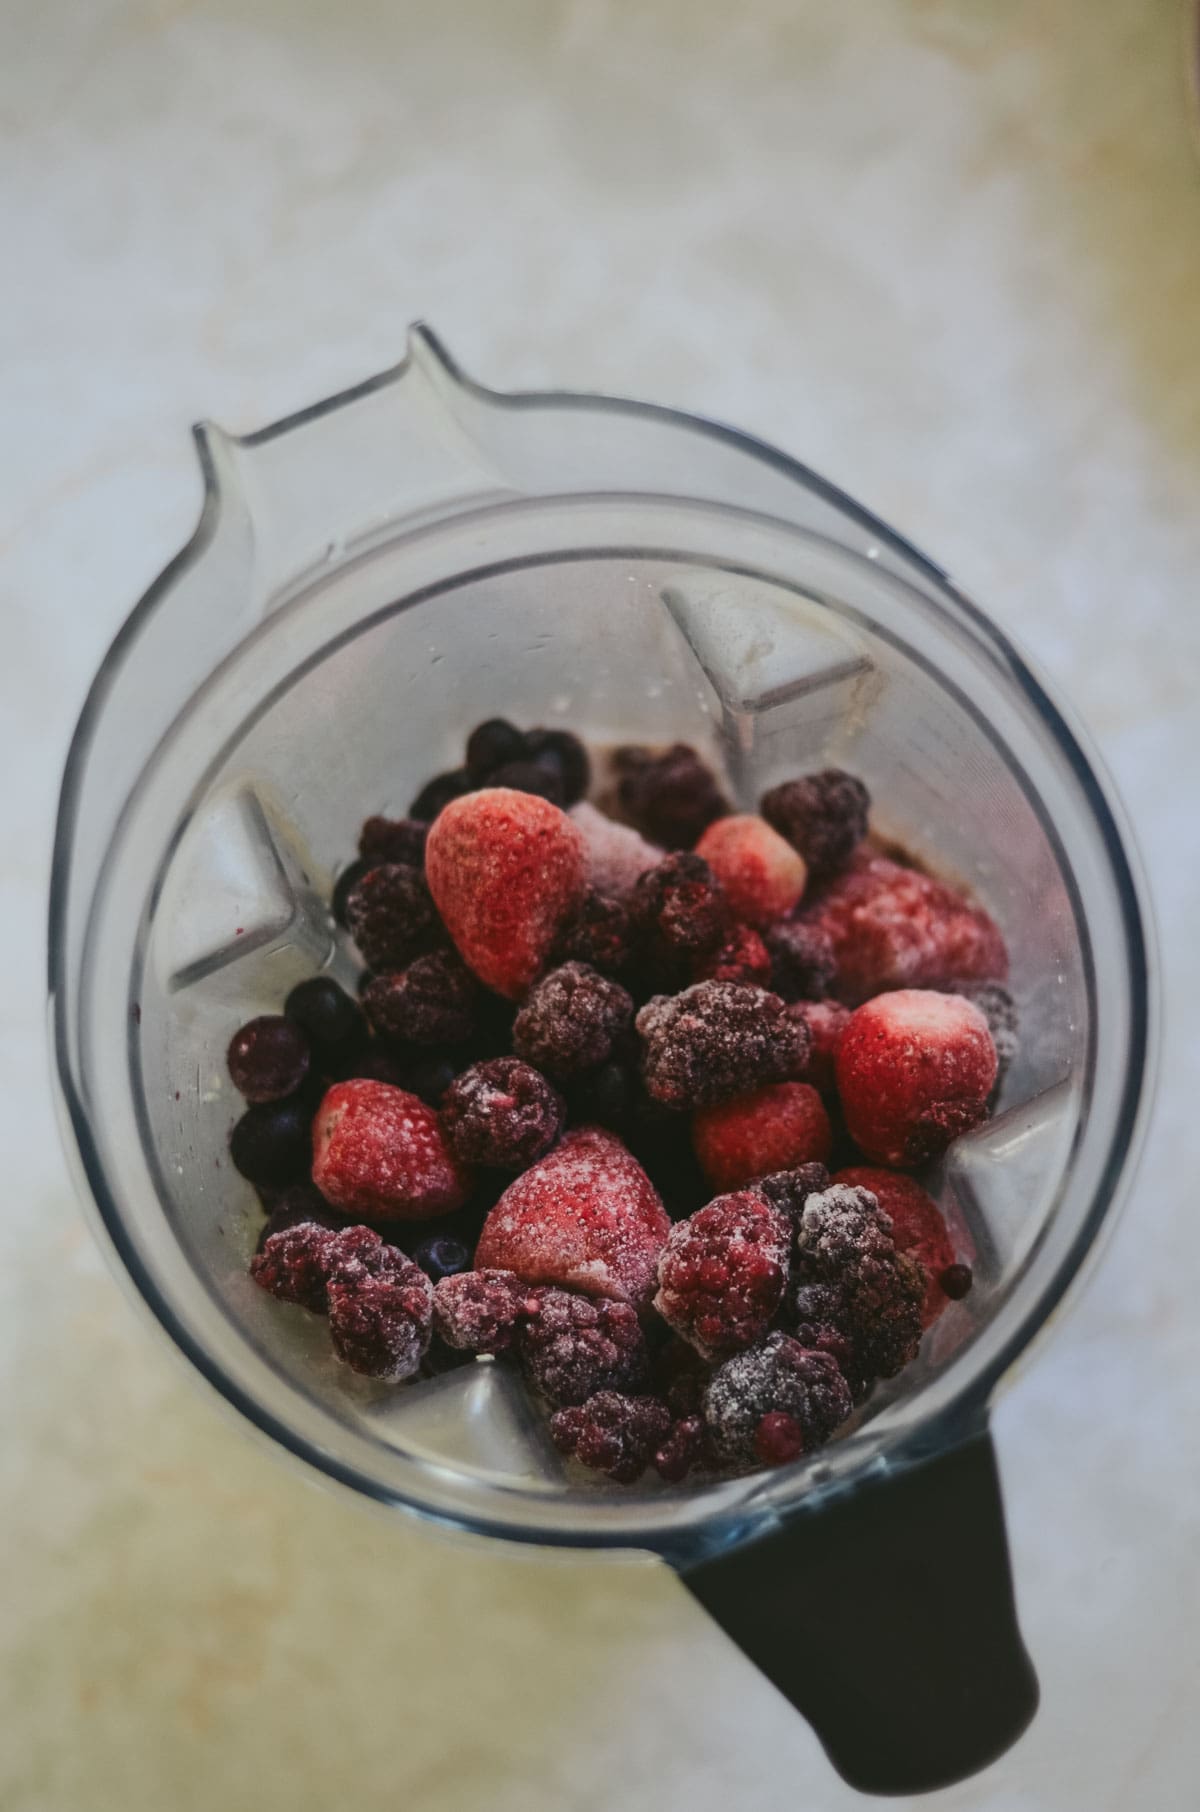 Frozen mixed berries, blueberries, strawberries, blackberries, in the blender for a berry chocolate smoothie.